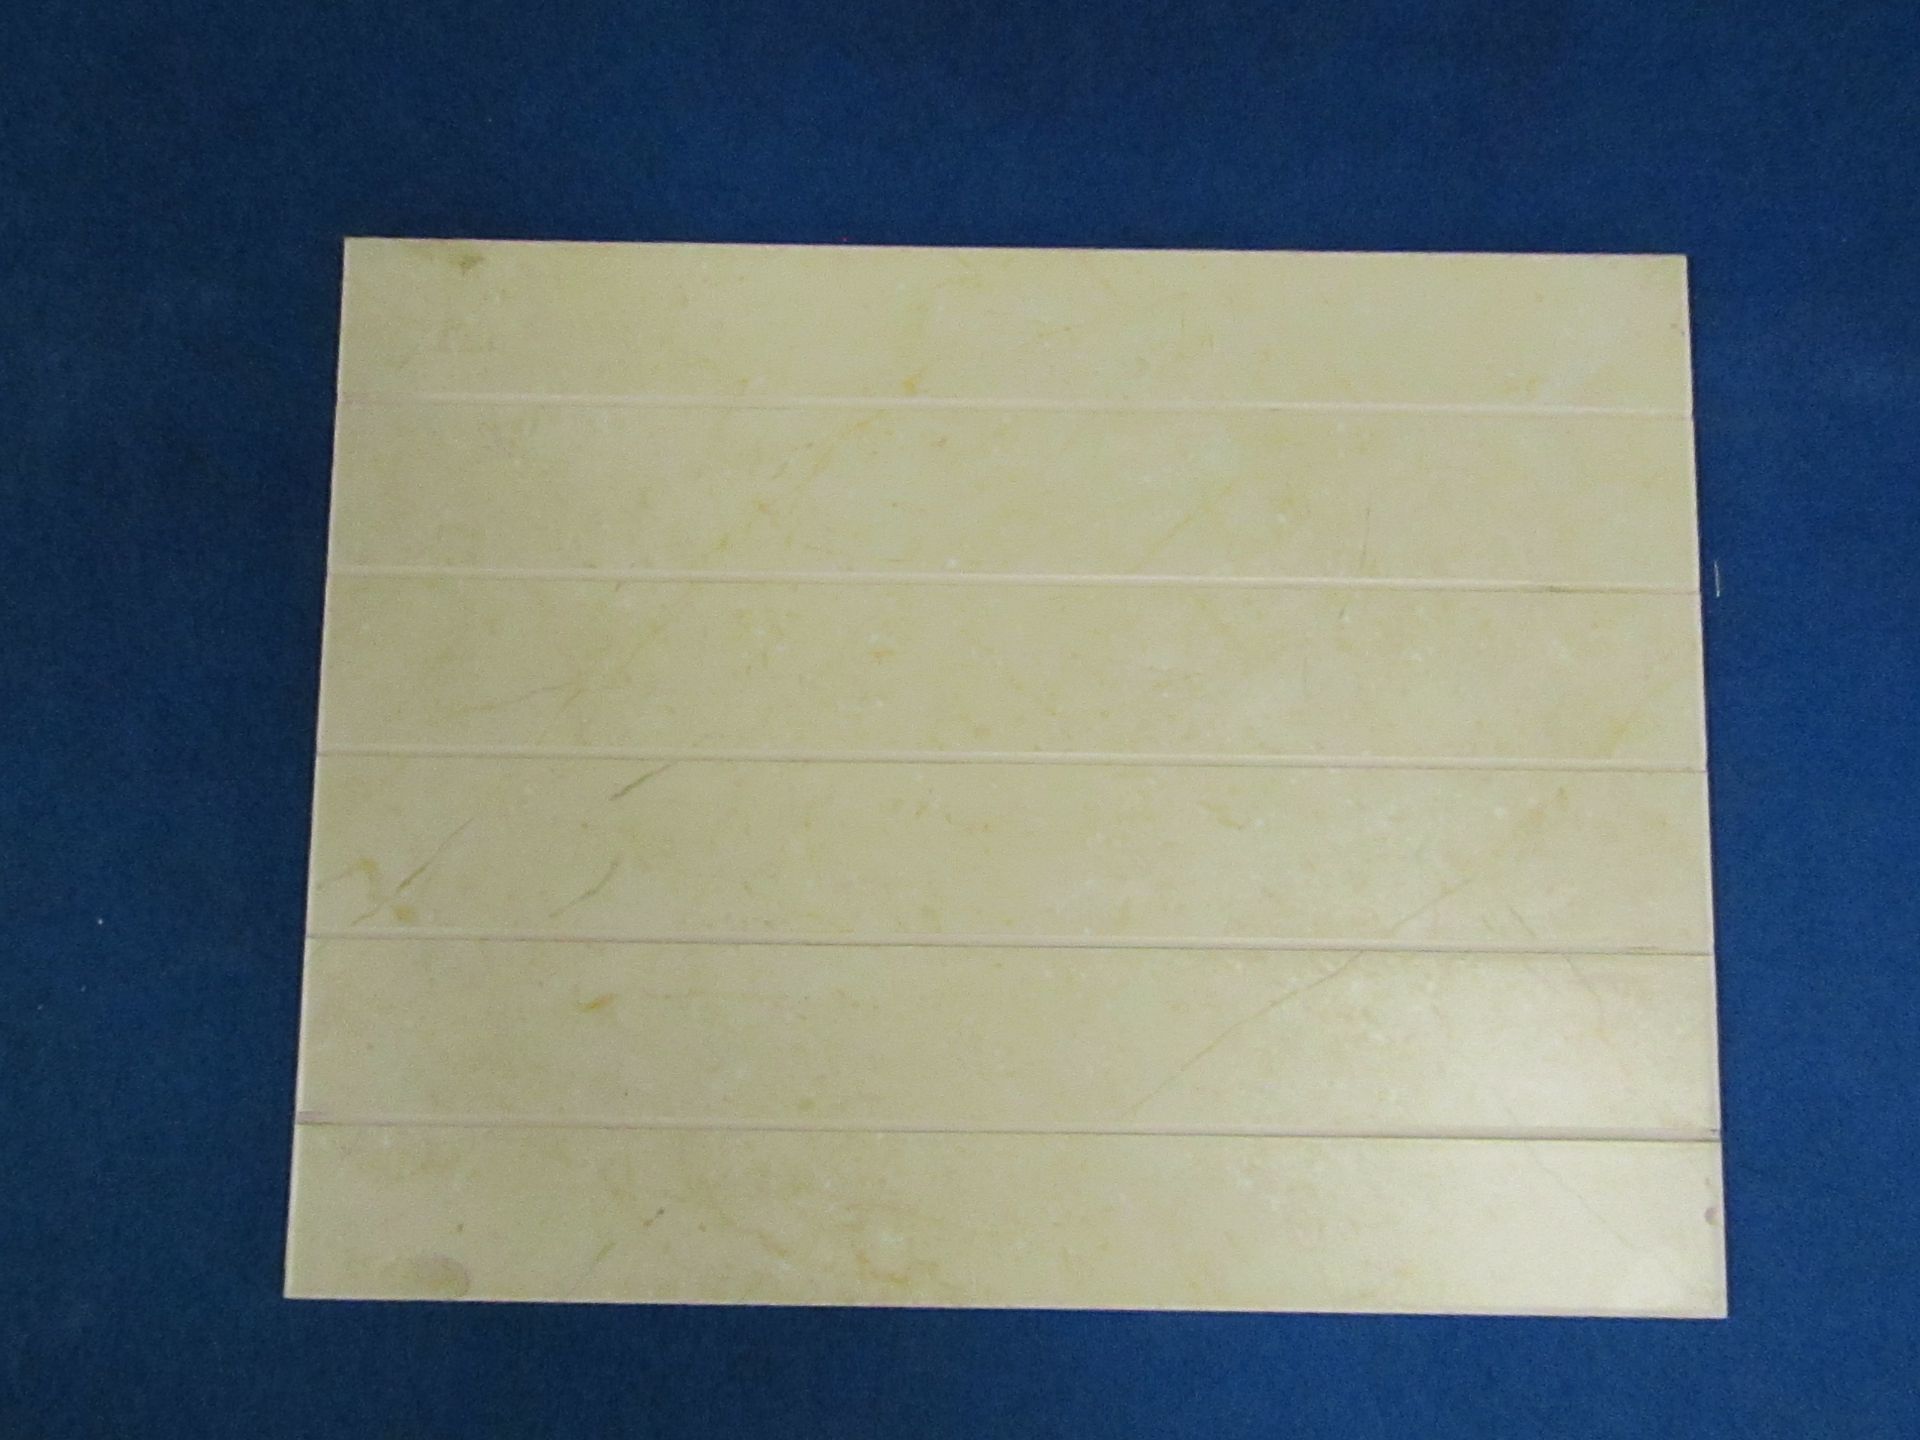 A Pallet containing 24 Packs of 10, Wickes 360x275 Crema Marfil satin Scored wall tiles, RRP £16.